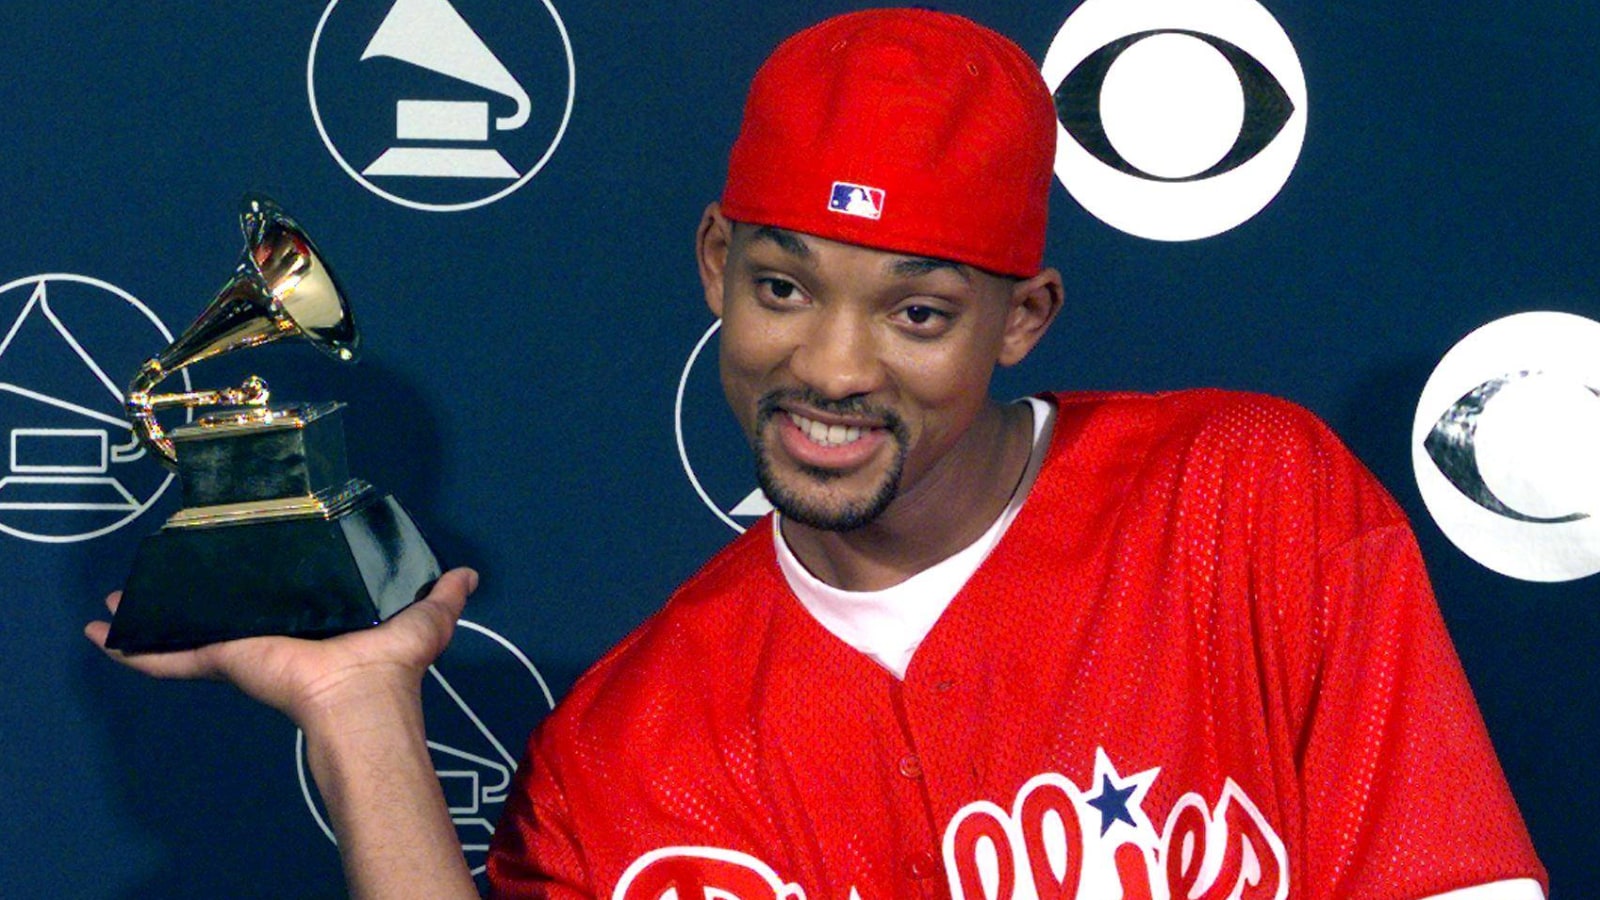 A 50th birthday celebration for the Fresh Prince: Will Smith's 15 best songs